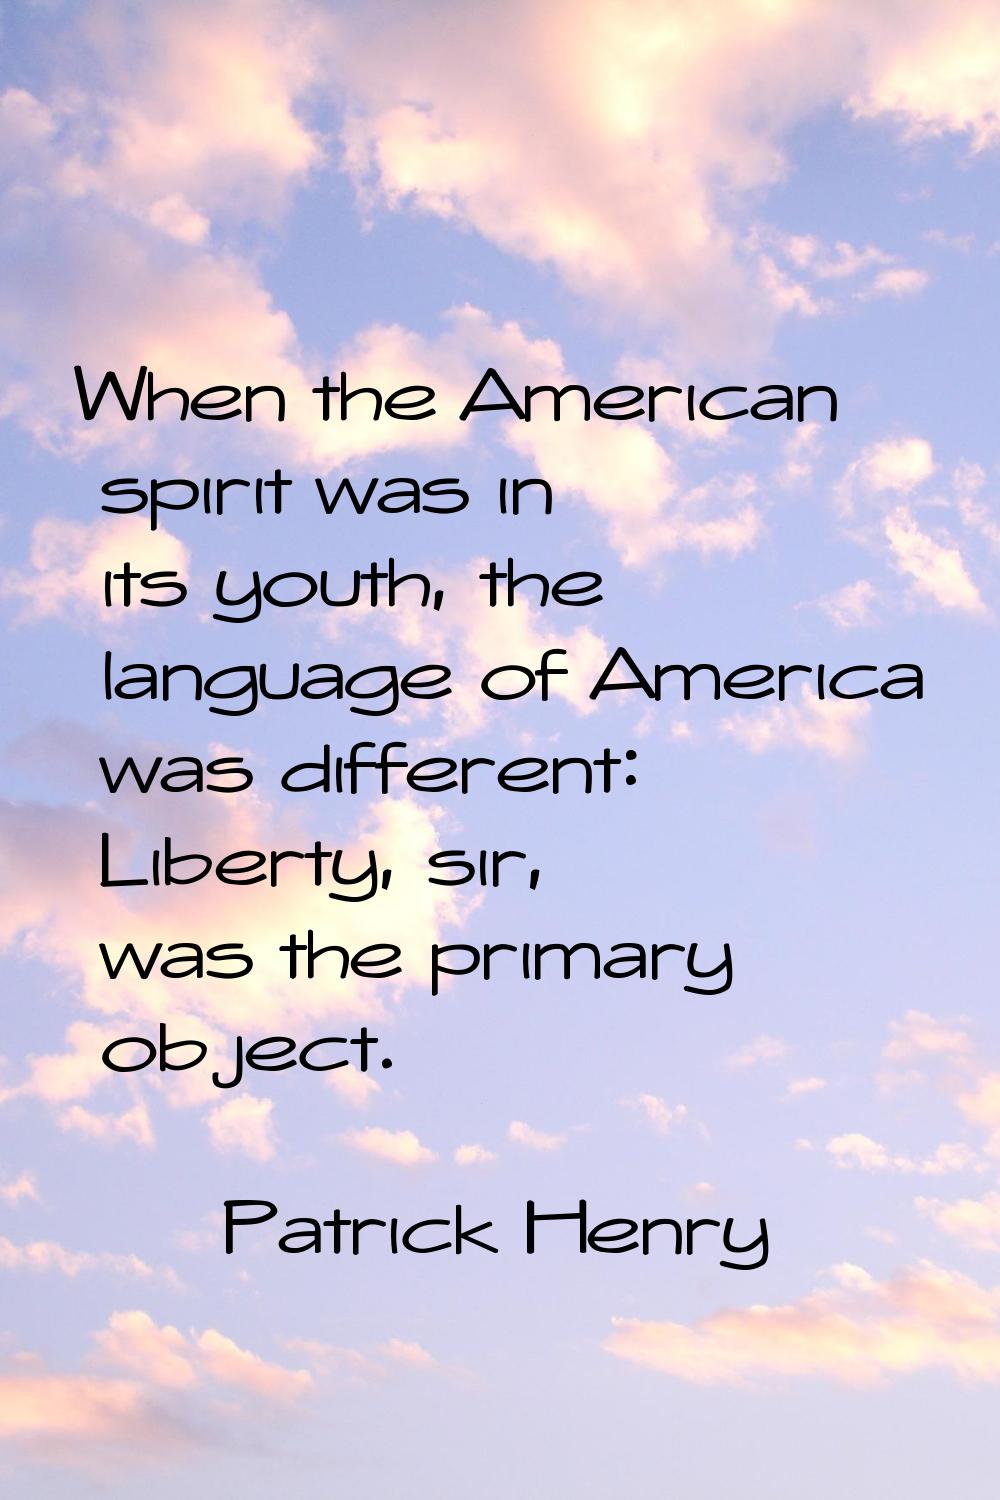 When the American spirit was in its youth, the language of America was different: Liberty, sir, was